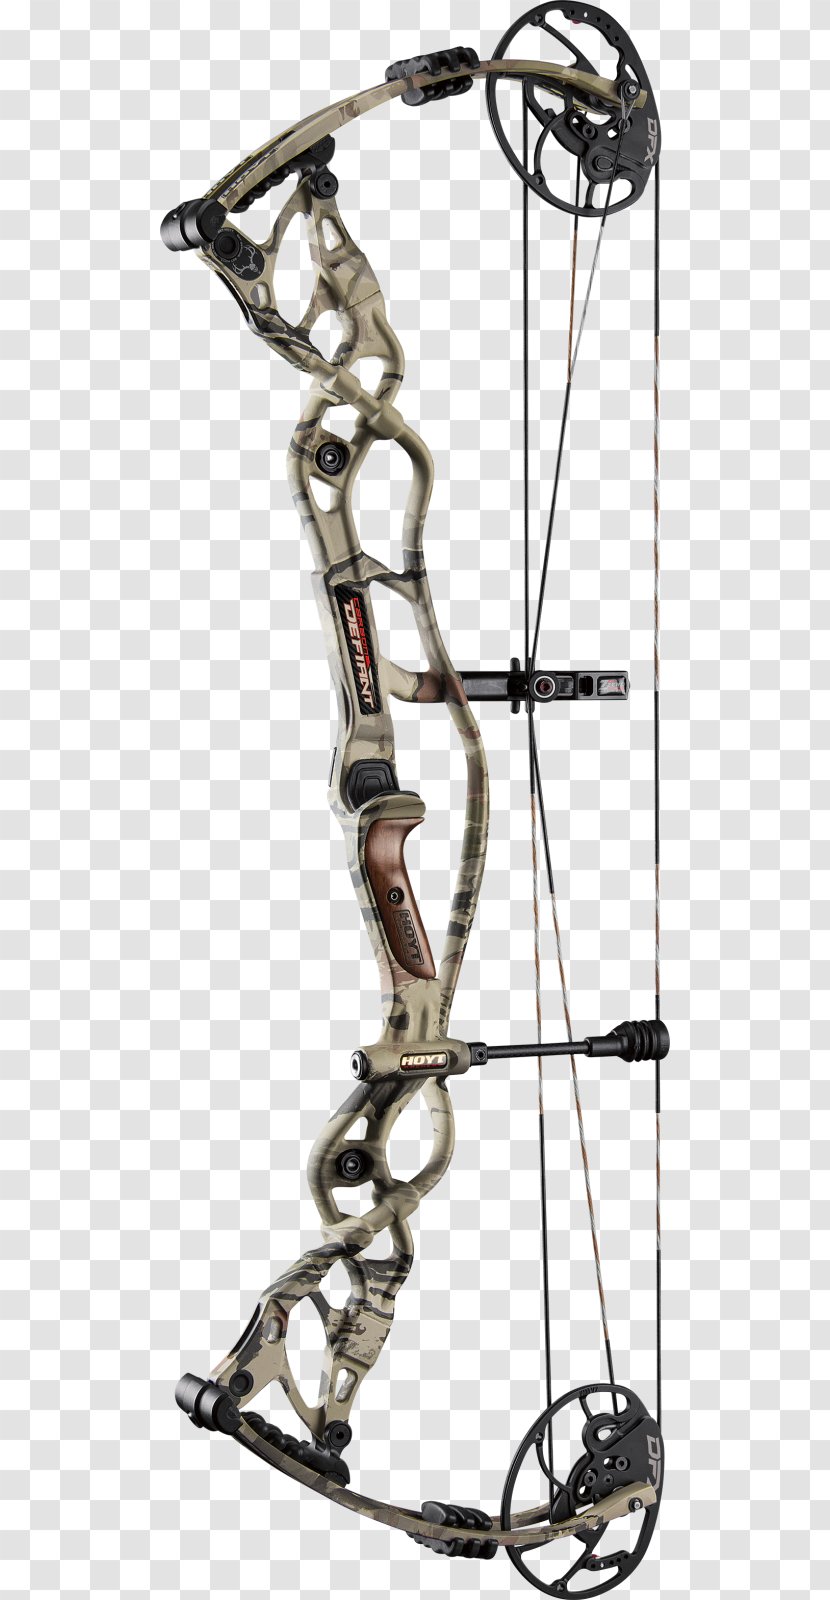 Compound Bows Bowhunting Archery Bow And Arrow - Pse - Puppies Transparent PNG